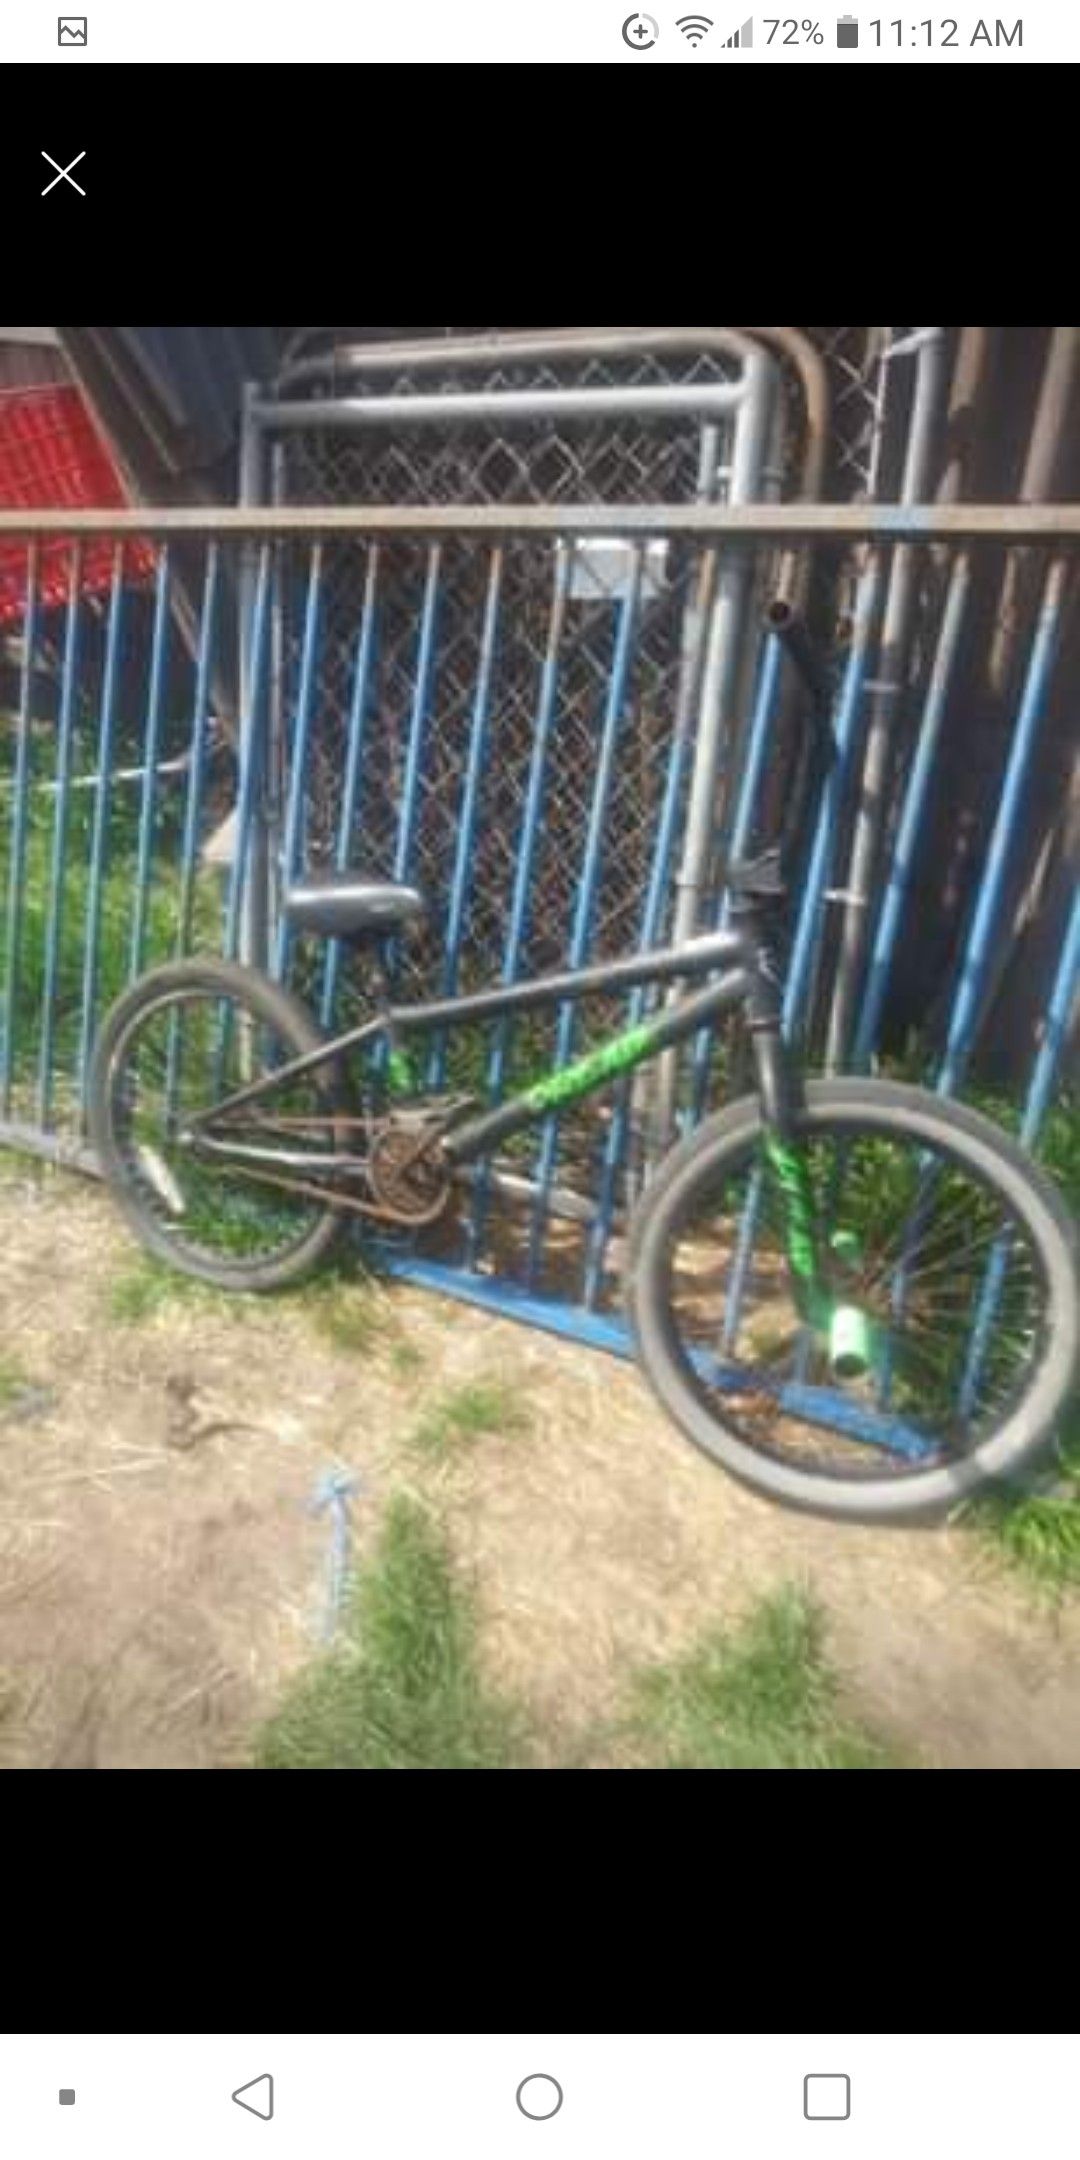 BIKE FOR SALE FOR 30 IT NEEDS A NEW INTER TUBE